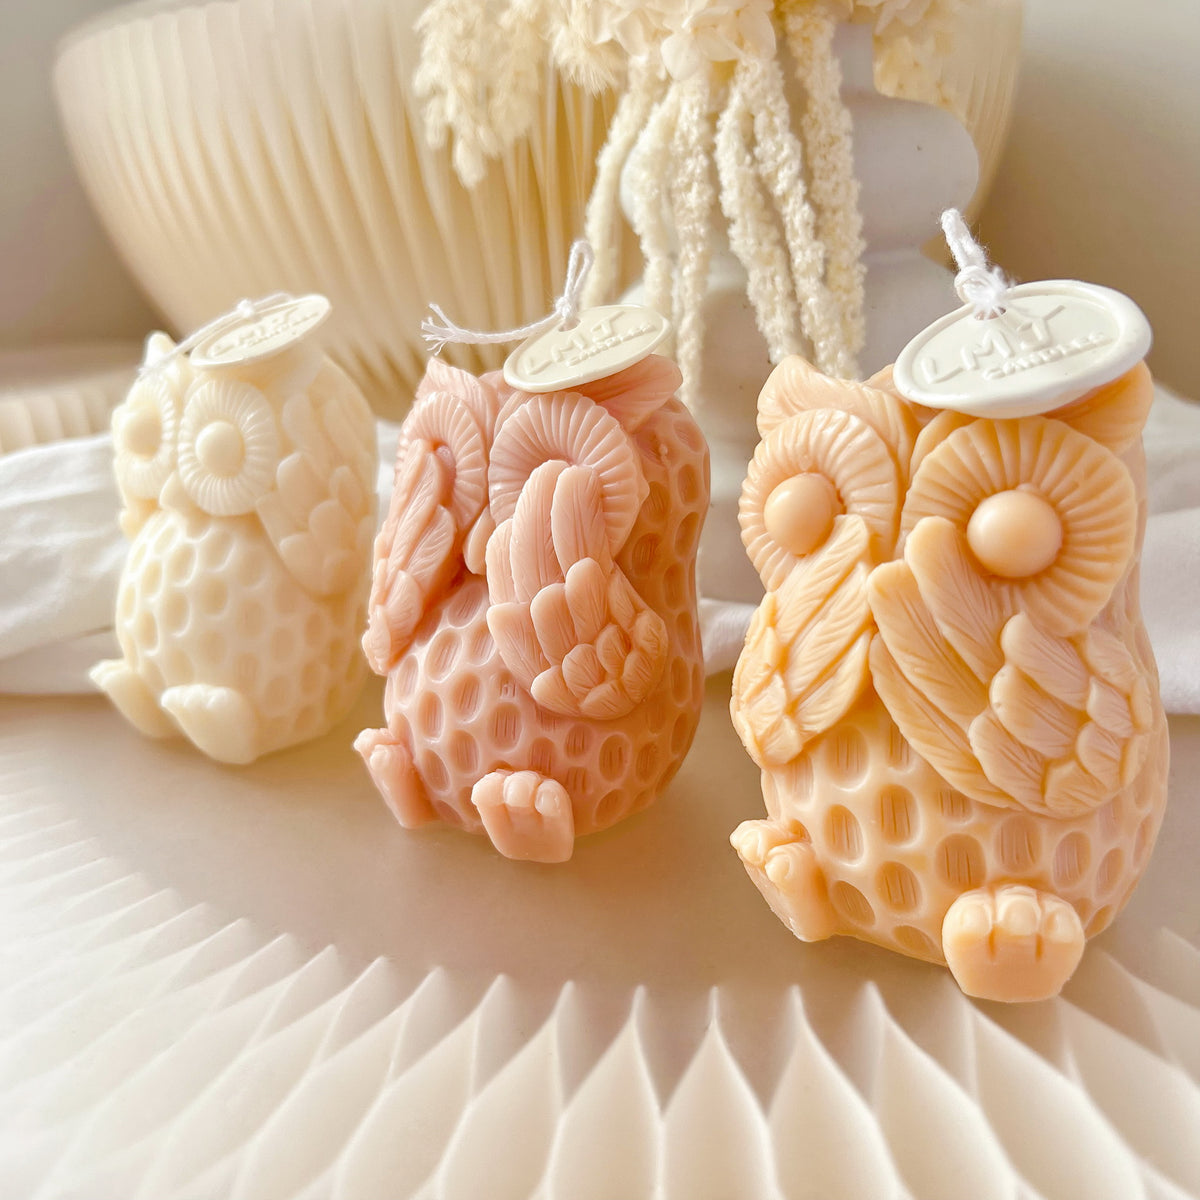 Three Wise Owls Scented Soy Animal Candles - LMJ Candles